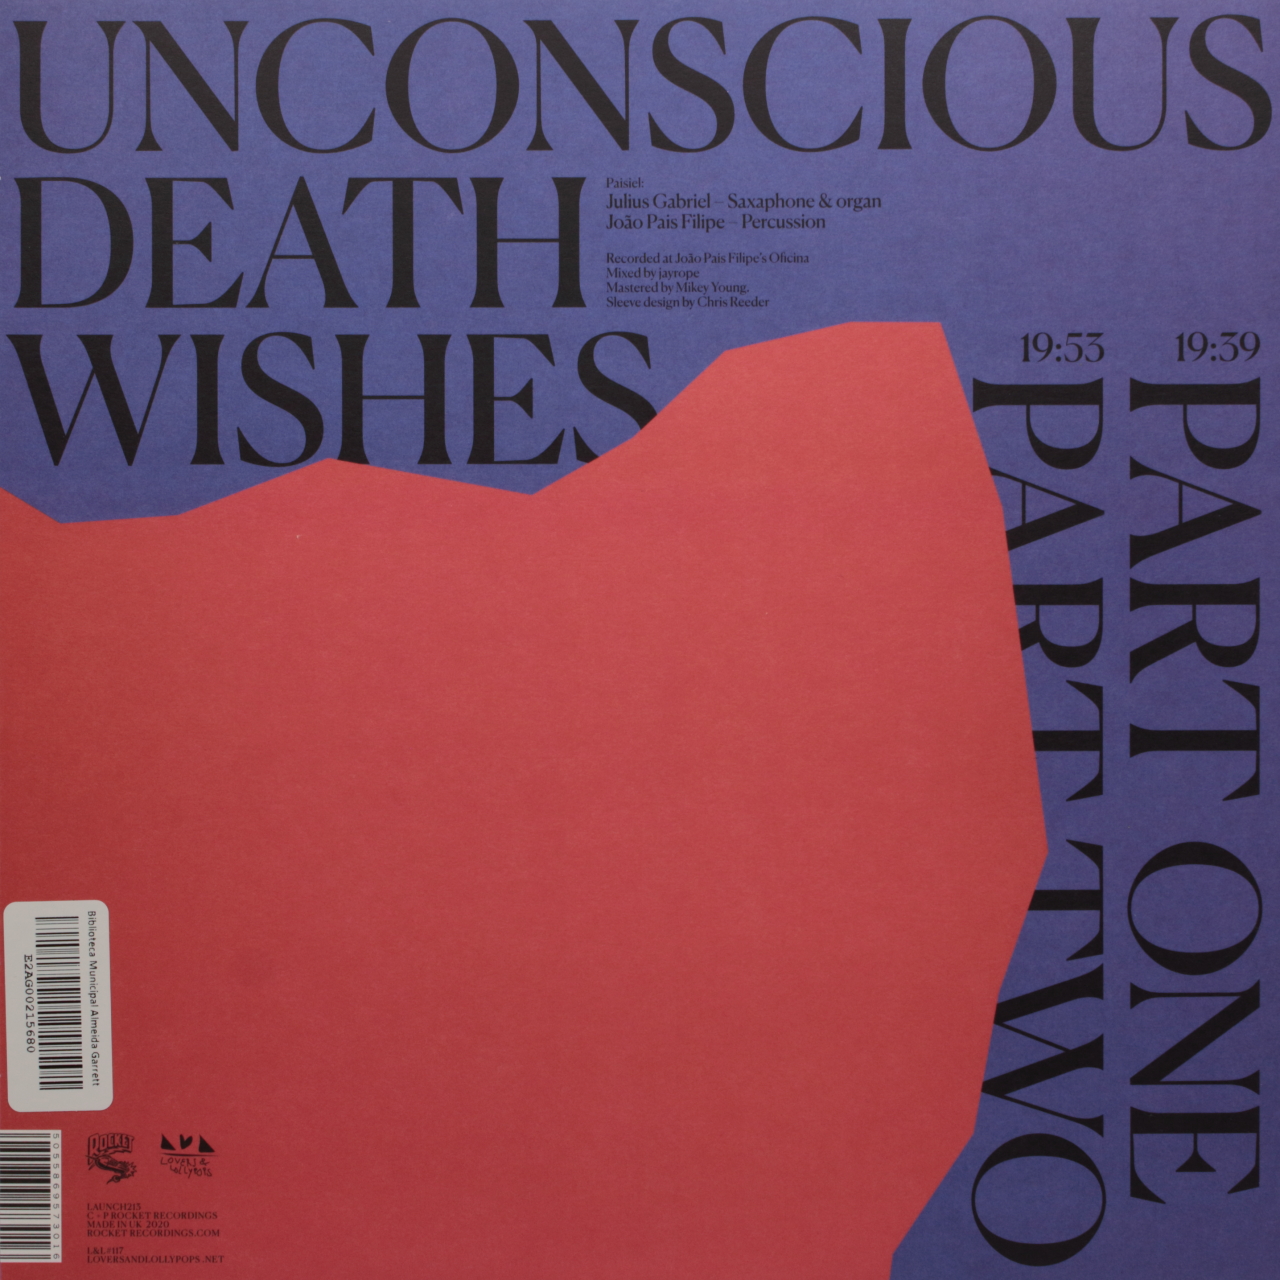 Unconscious Death Wishes